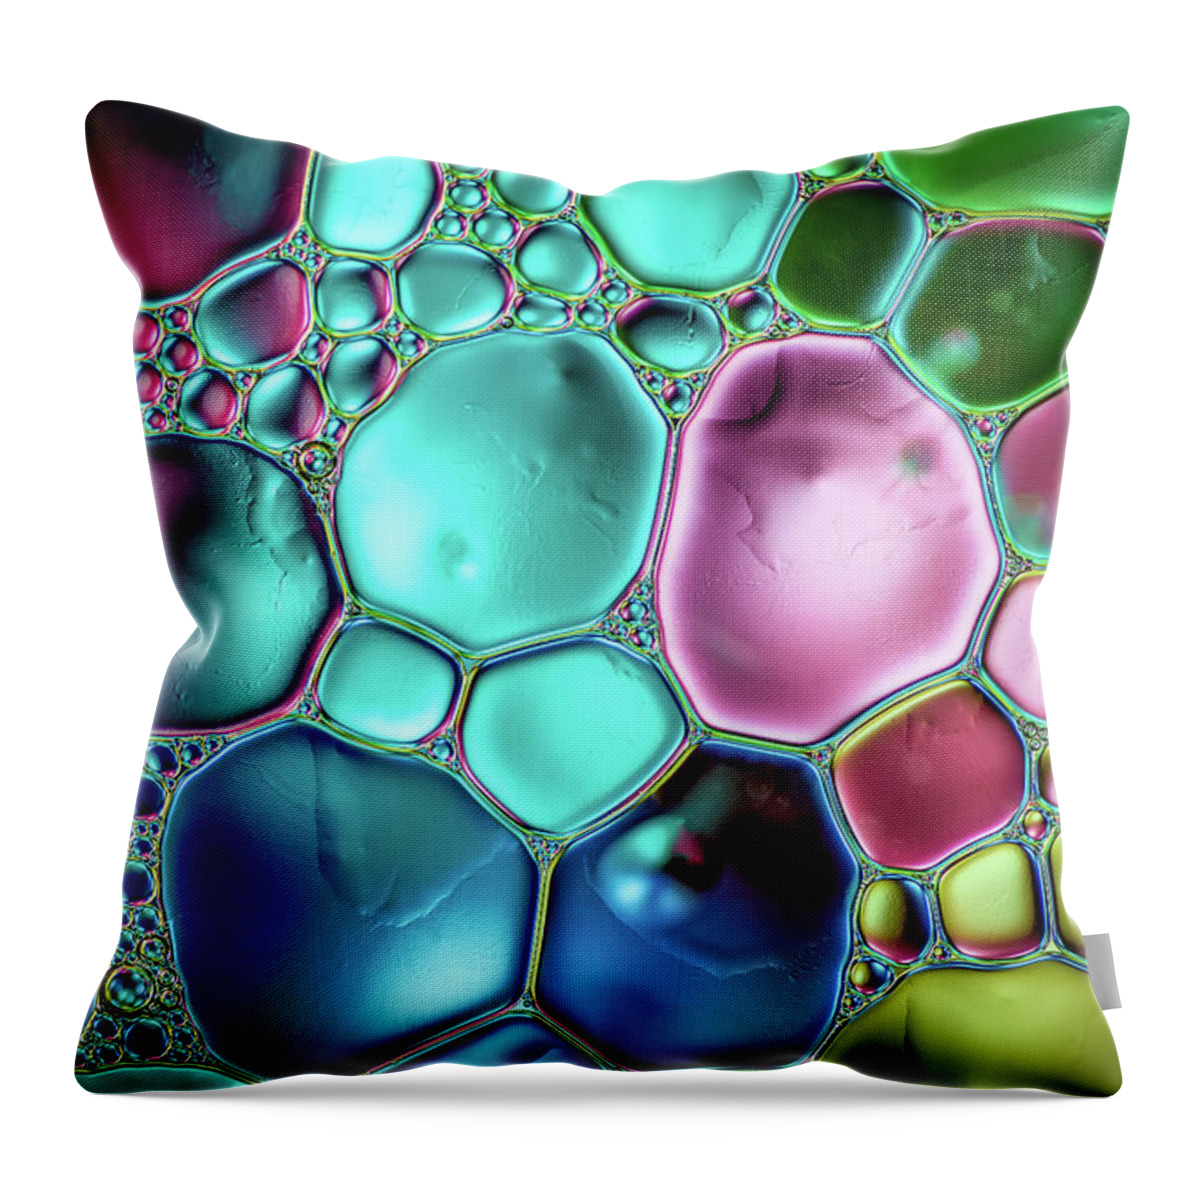 Natural Pattern Throw Pillow featuring the photograph Oil&water Abstract by Yasar Ugurlu